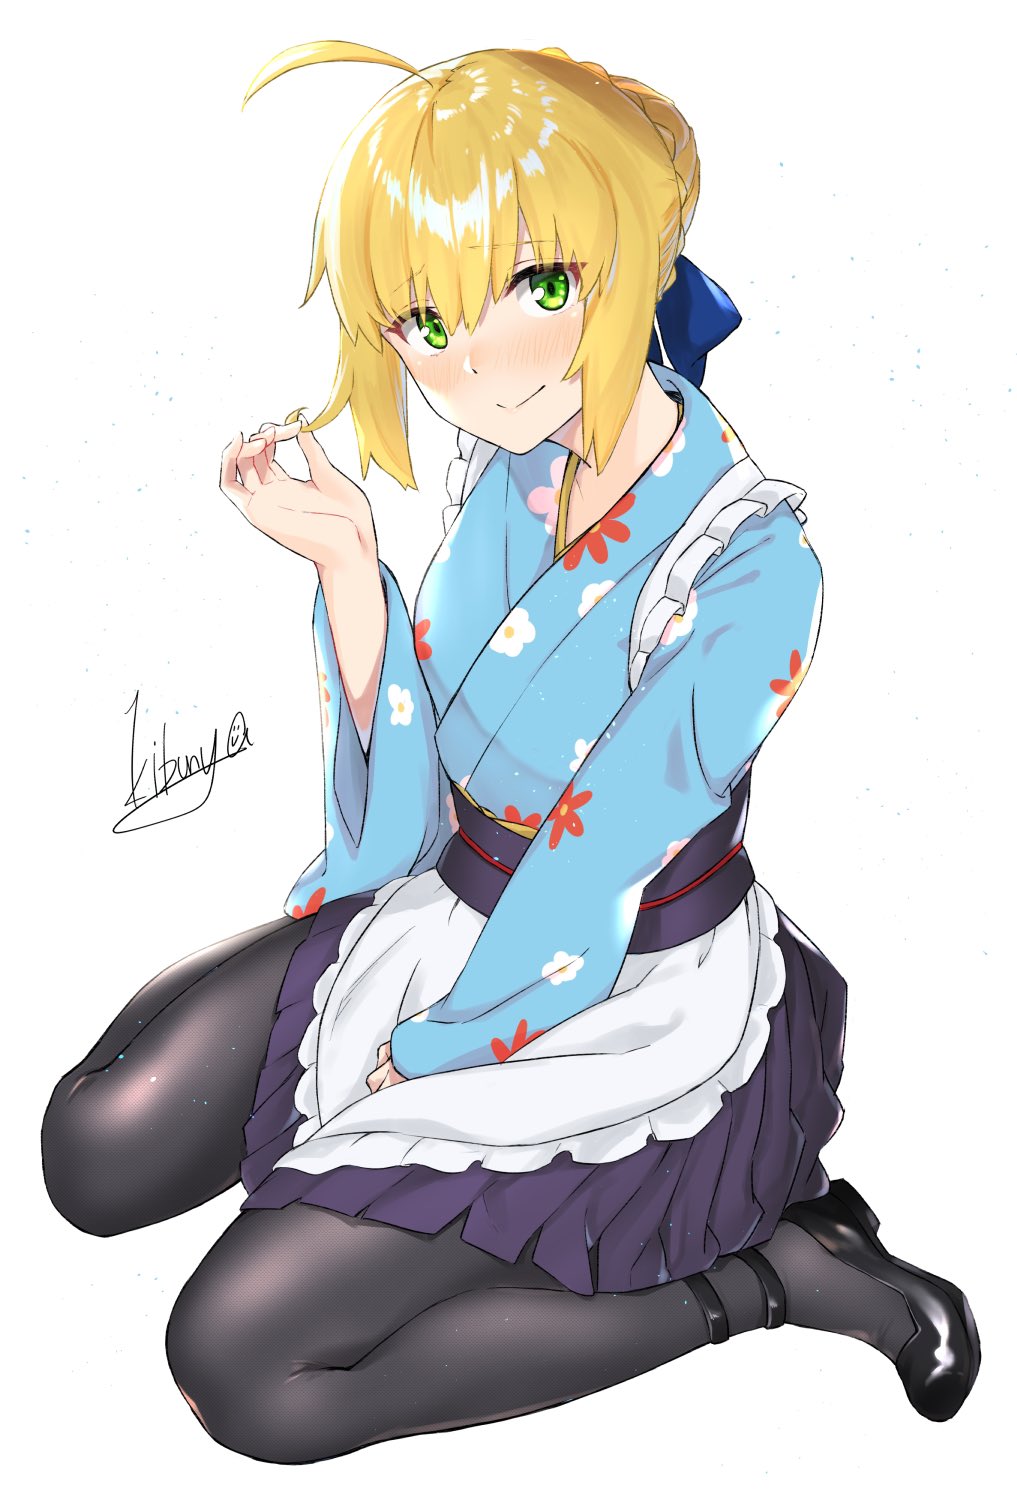 Anime 1017x1503 Fate series Fate/Stay Night anime girls blushing embarrassed small boobs pantyhose thighs ahoge touching hair smiling high angle kimono maid outfit Saber simple background 2D green eyes looking at viewer portrait display fan art anime blonde kneeling Artoria Pendragon